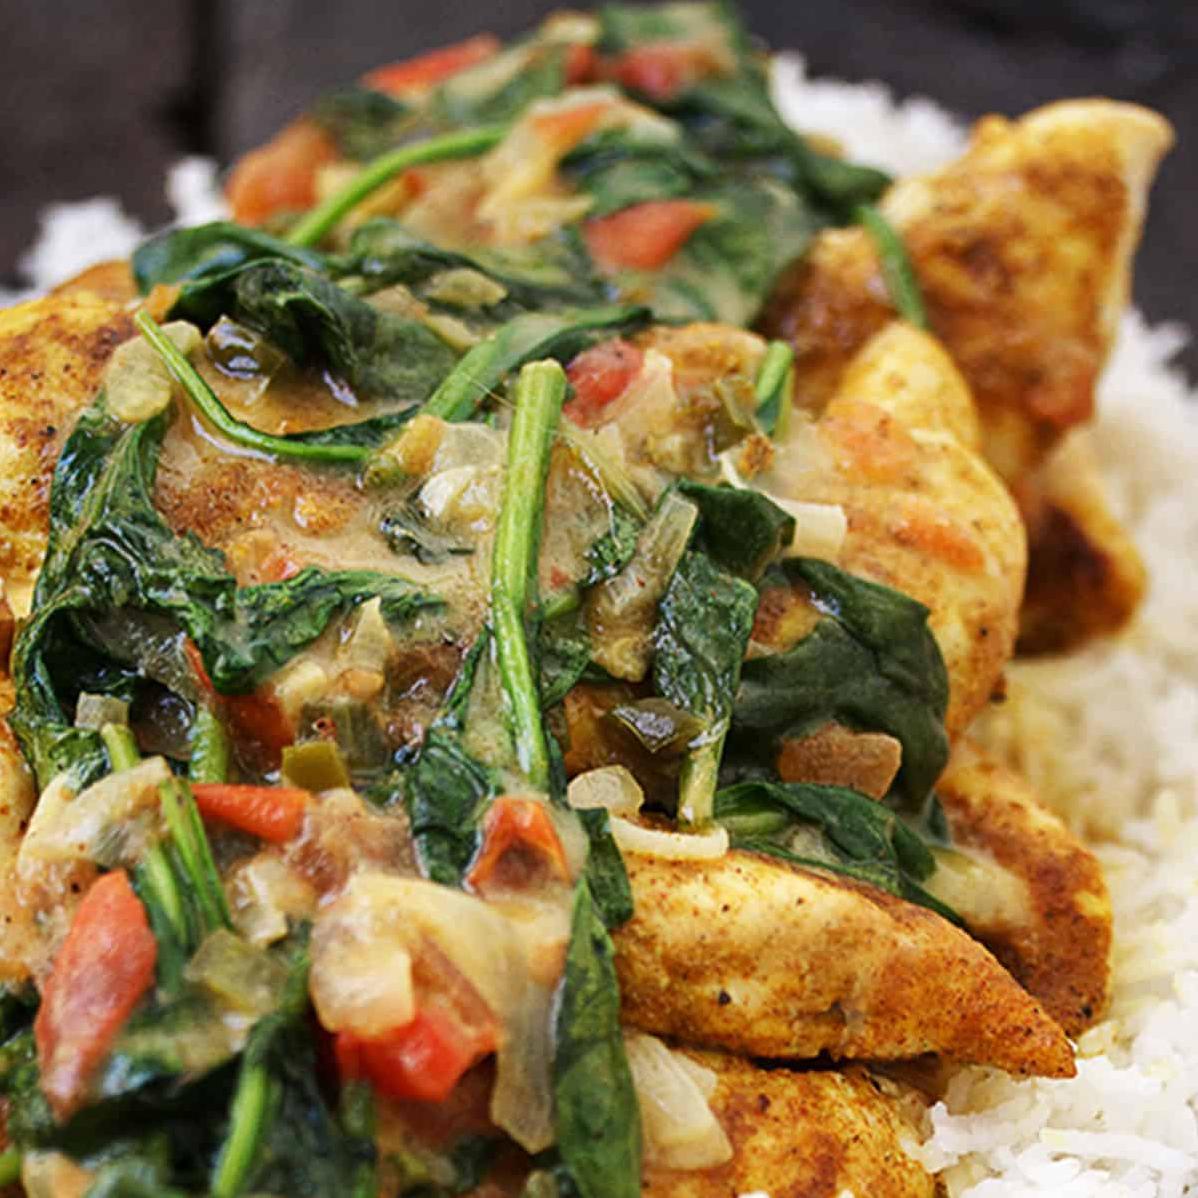 Warm Your Taste Buds with Our Exotic Chicken Curry Dish